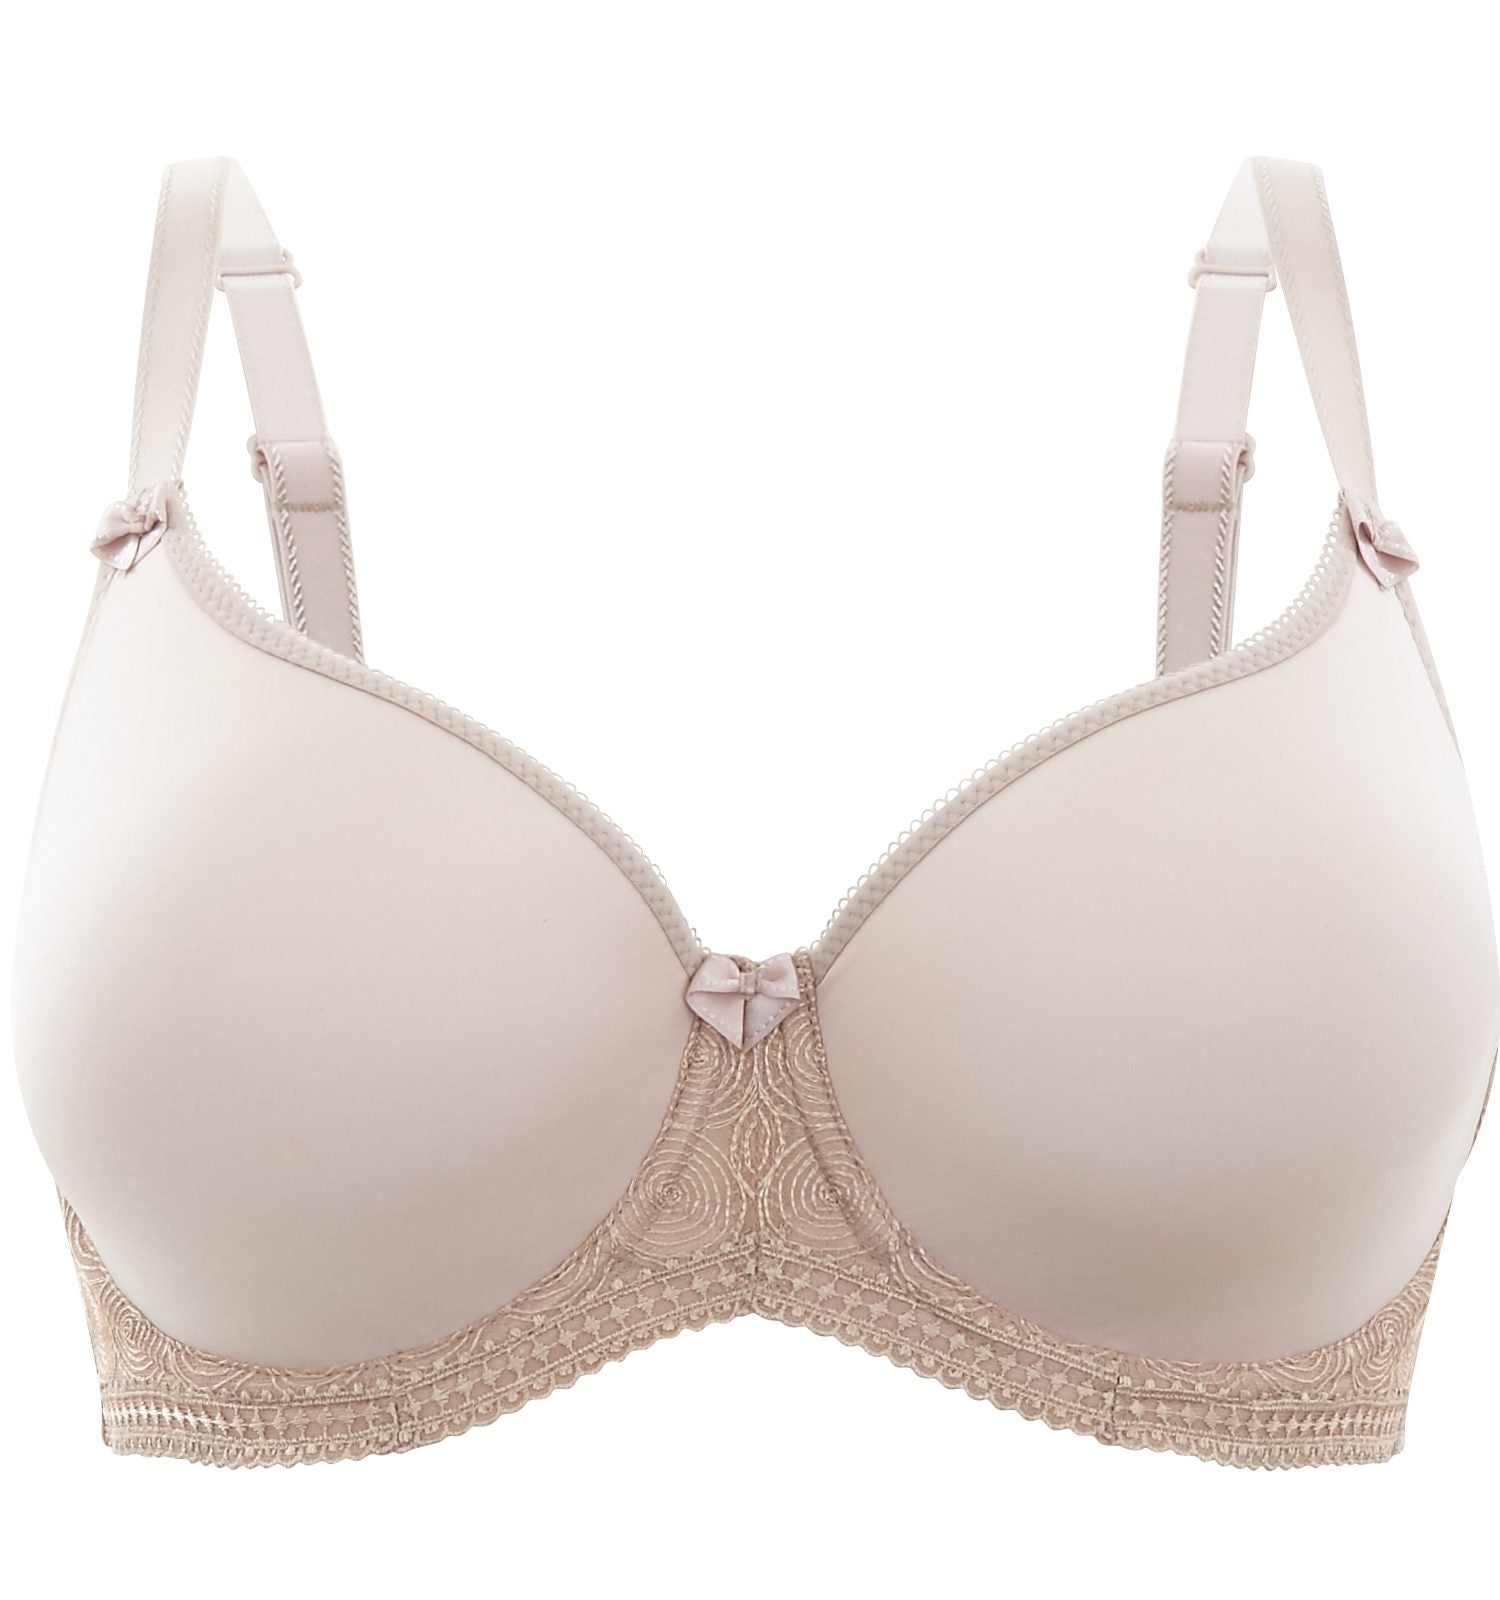 Panache Cari Moulded Spacer 7961 Champagne